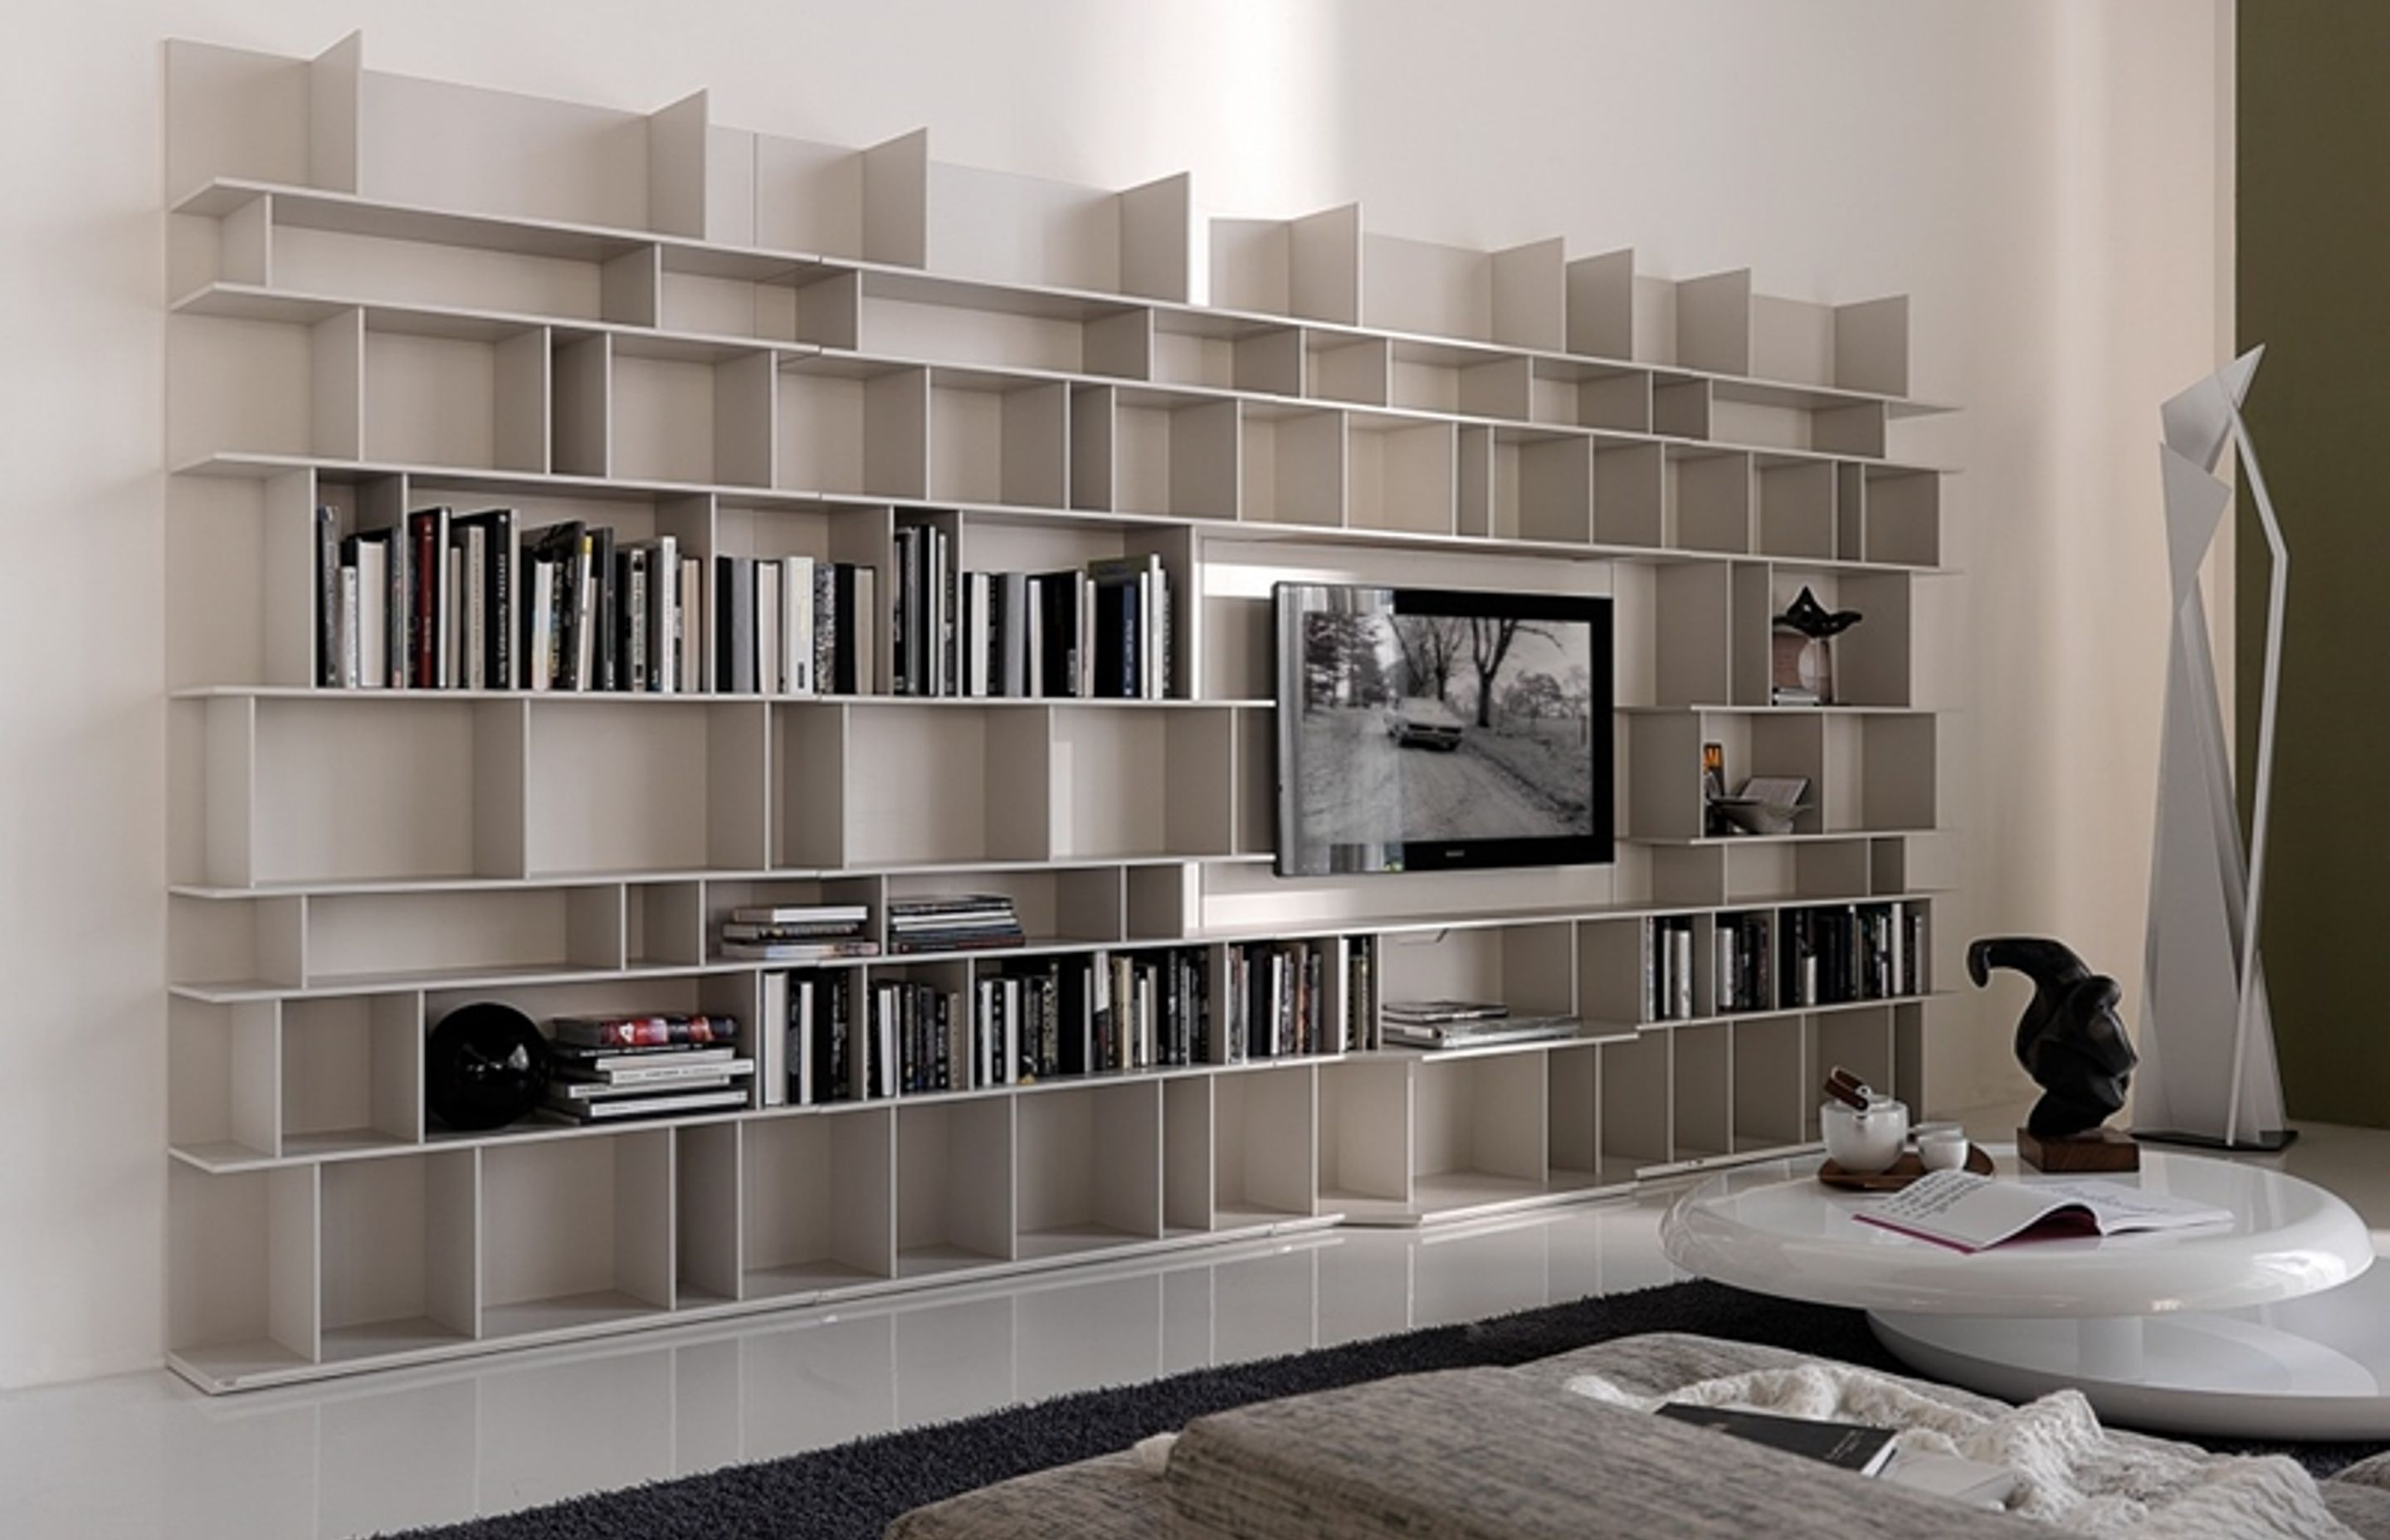 The Wally bookshelf is ideal for sophisticated storage.